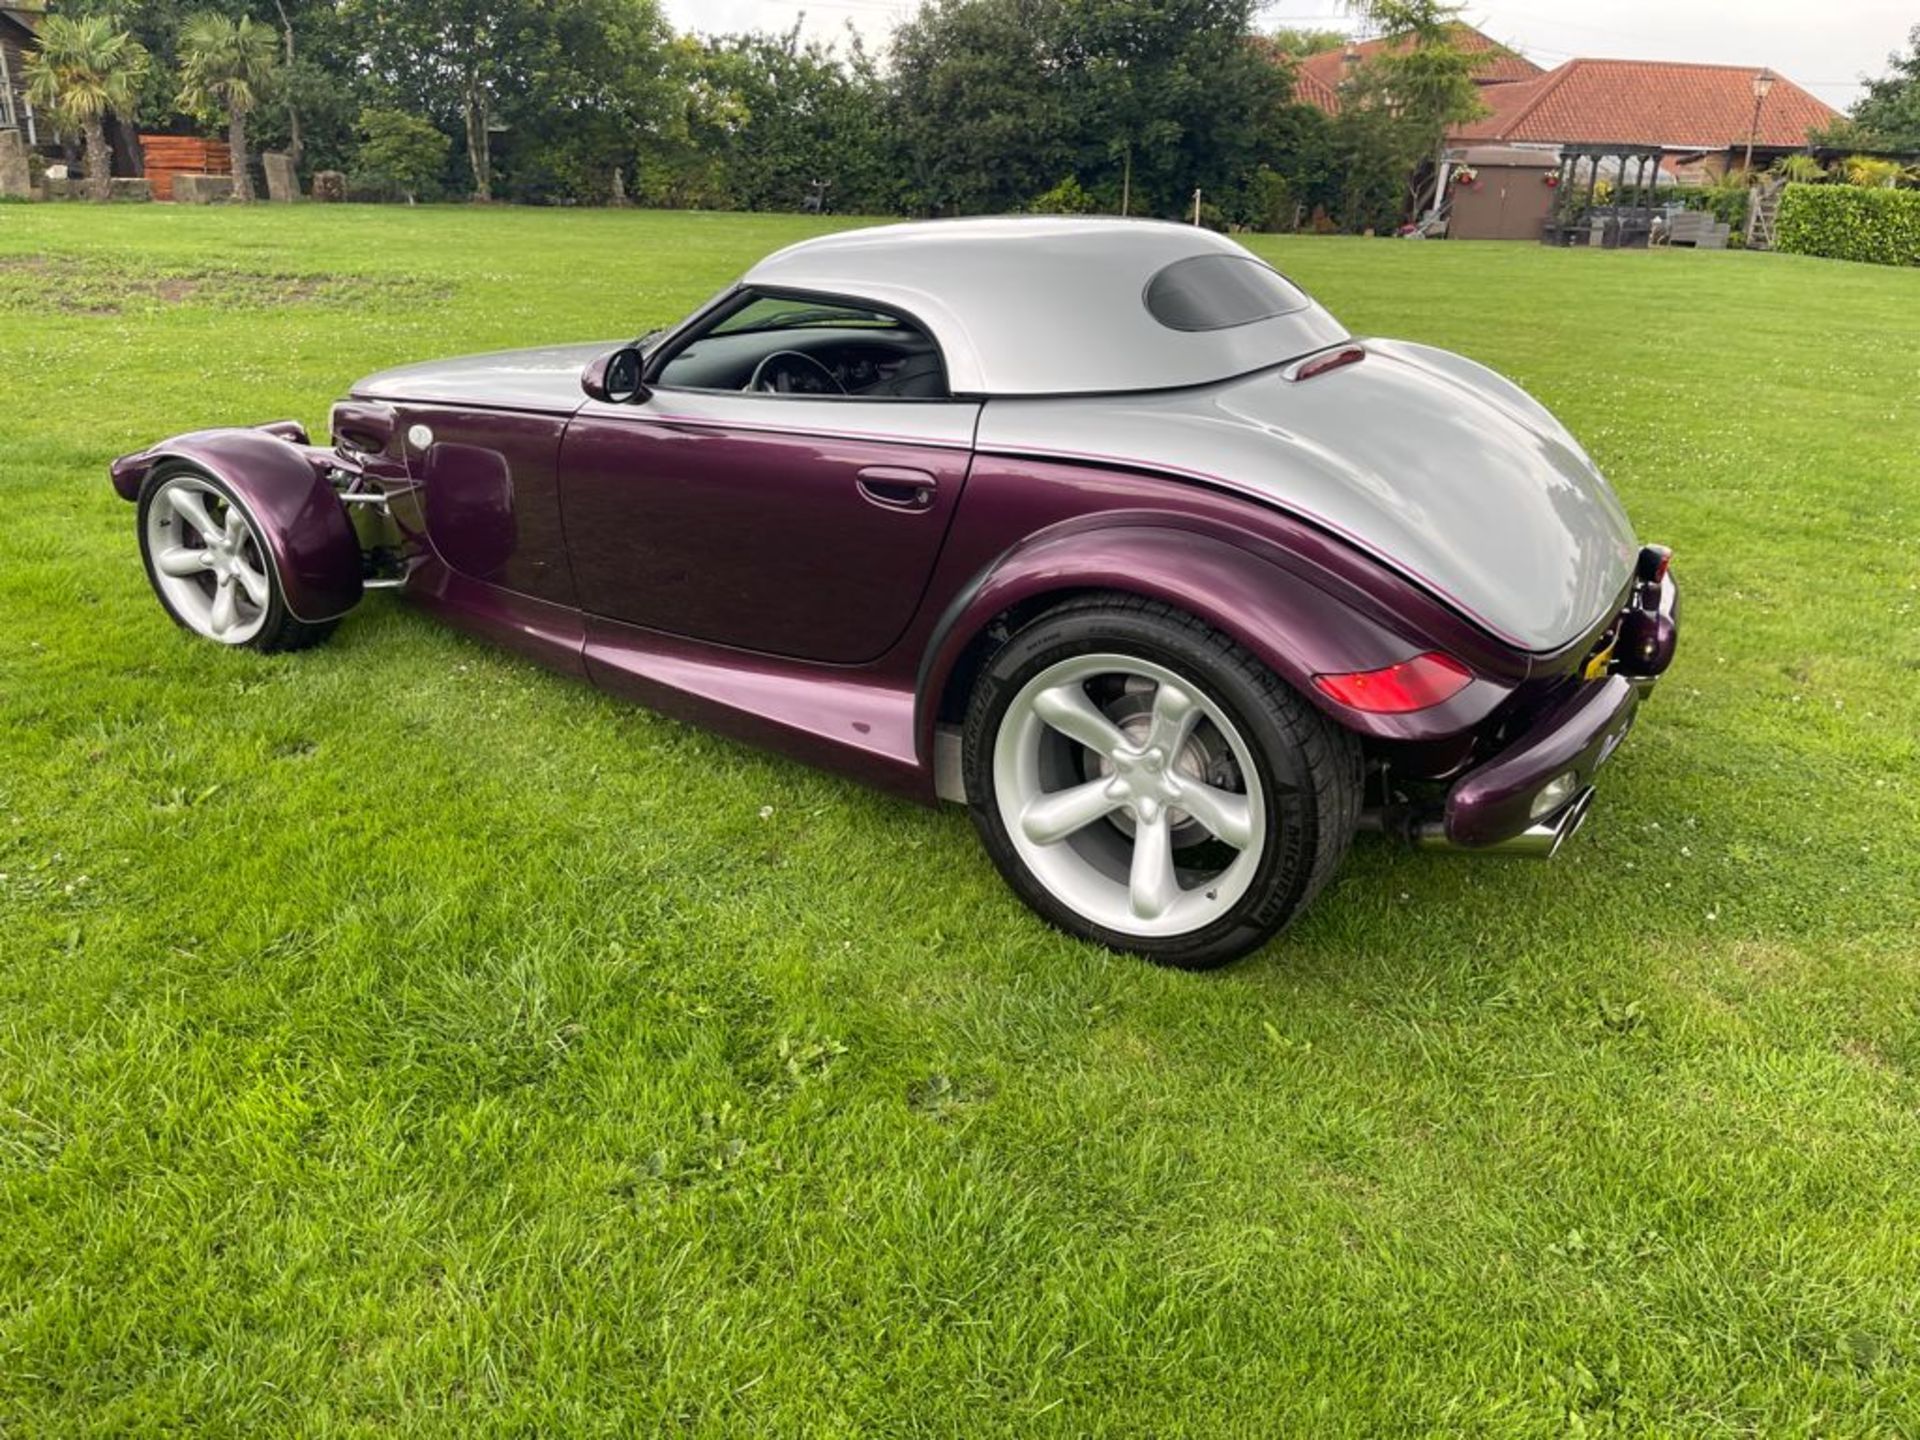 1998 CHRYSLER PLYMOUTH PROWLER V6 2 DOOR CONVERTIBLE, 3500cc PETROL ENGINE, AUTO *NO VAT* - Image 12 of 32